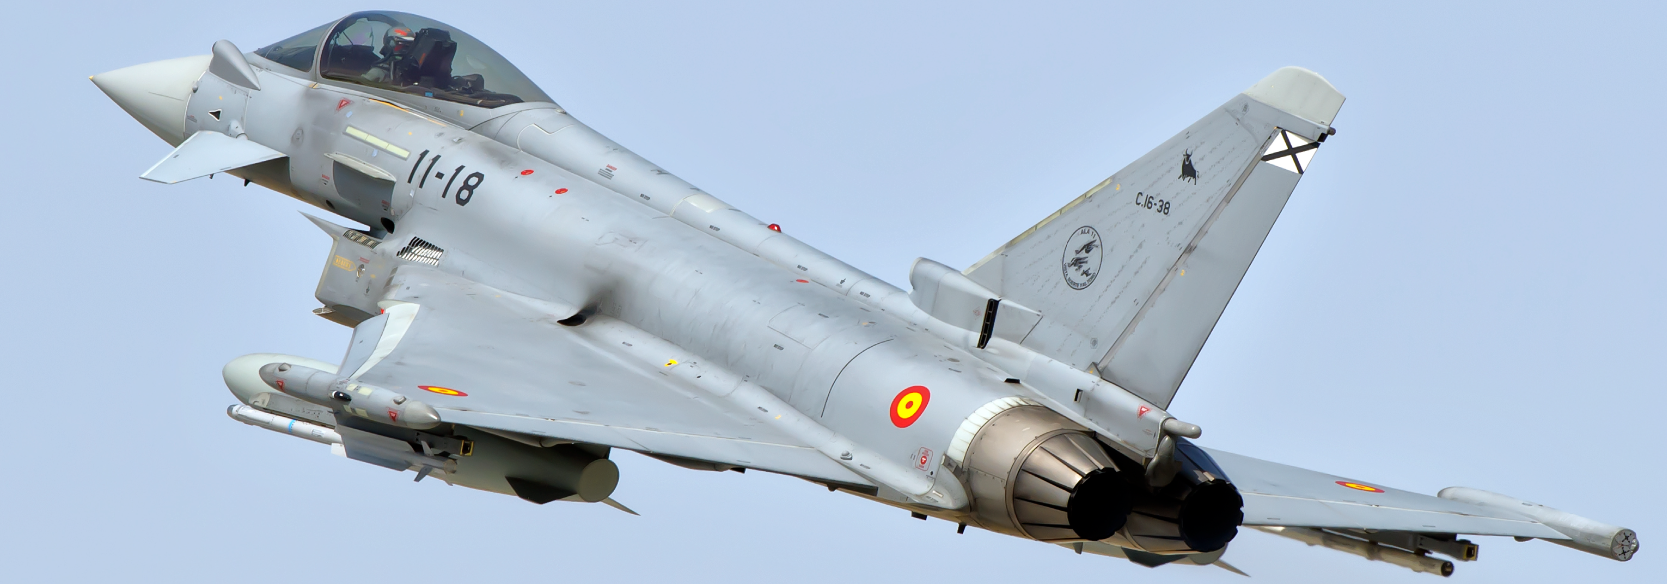 eurofighter_800_x_280.png